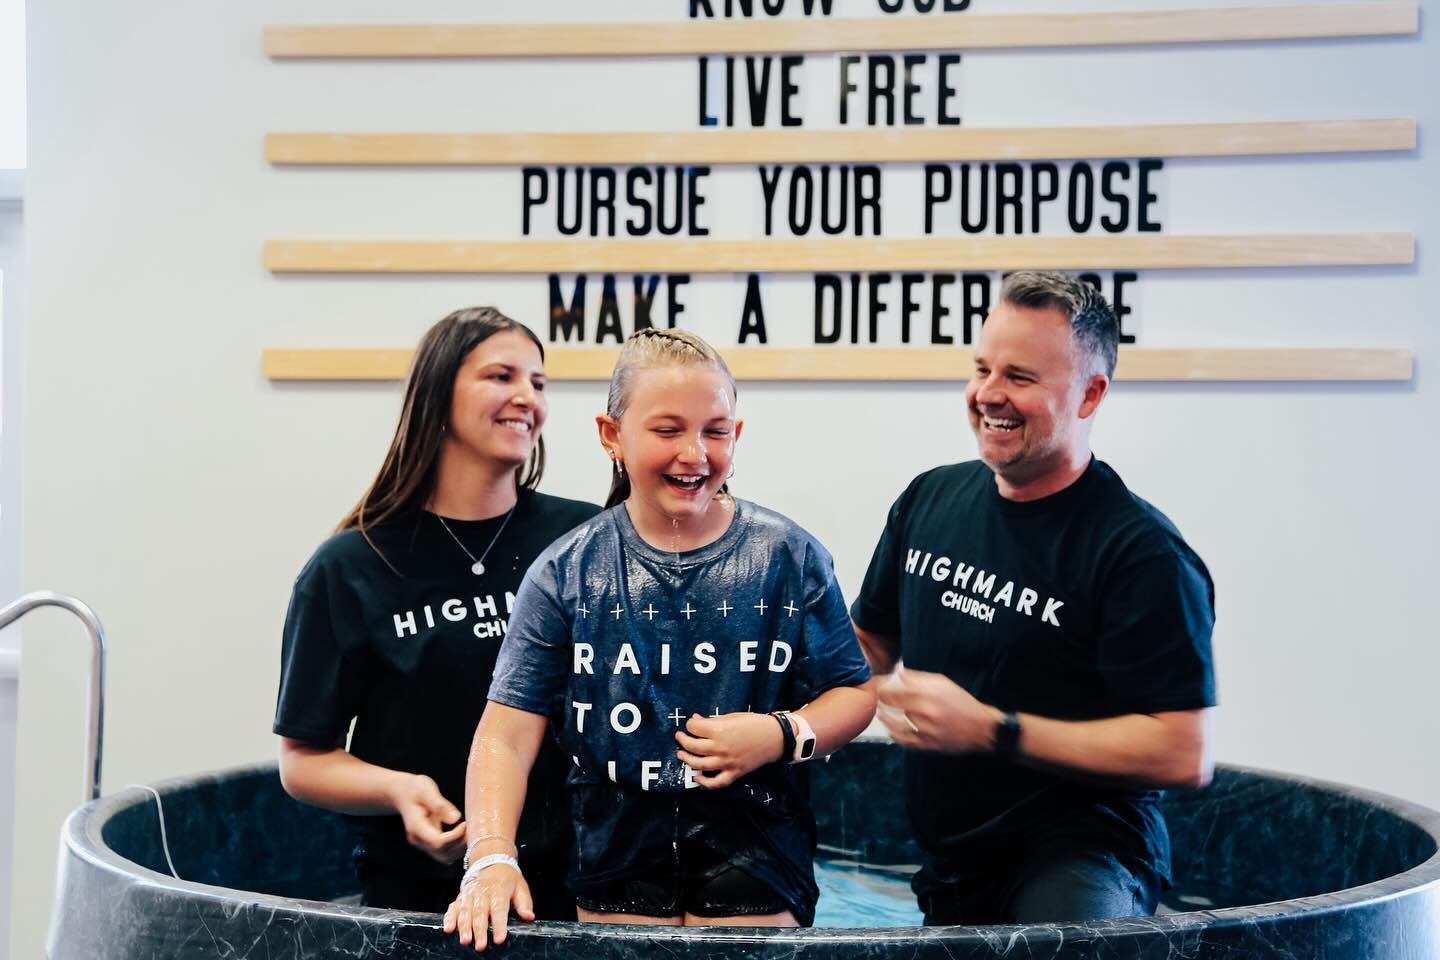 We never get tired of celebrating water baptisms and this past Sunday was no exception. 💧Praise God for lives changed and people going public with their faith! 🙌

#fishersindiana #fishers #noblesvilleindiana #noblesville #carmel #carmelindiana #ham